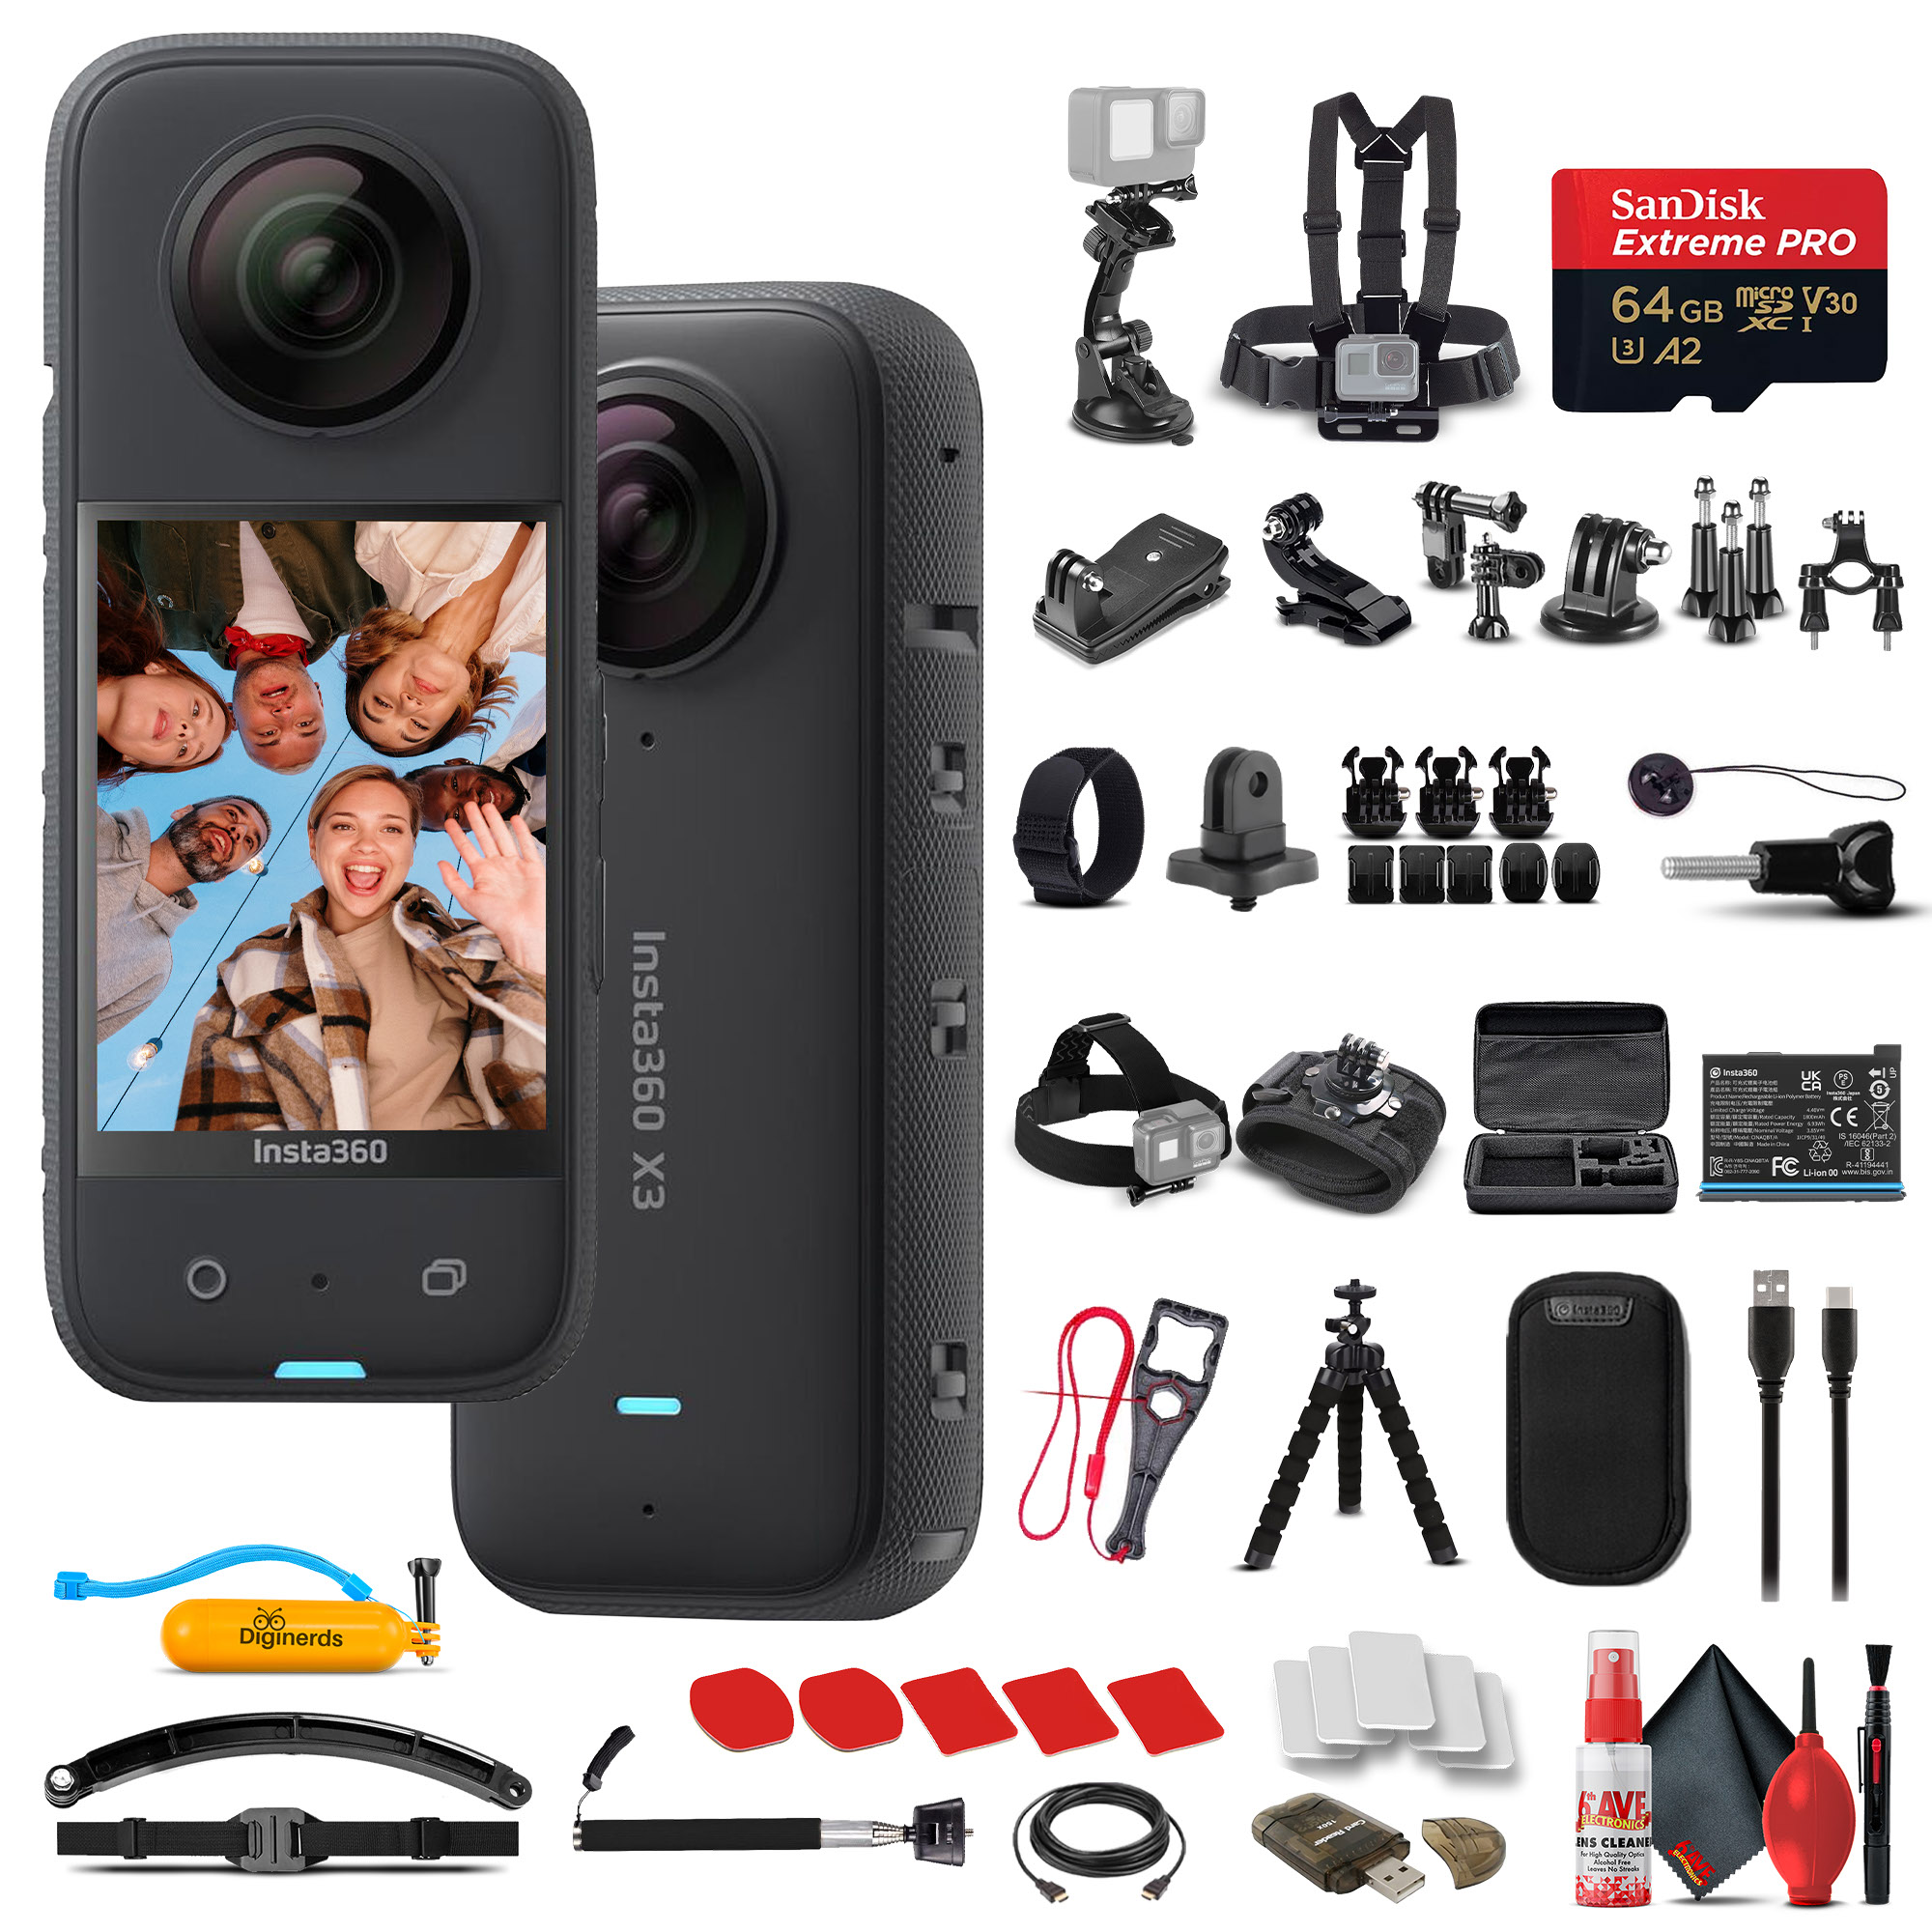 guide achat 360 camera360 photo360 video360 insta360 one x3 onex3 one-x3